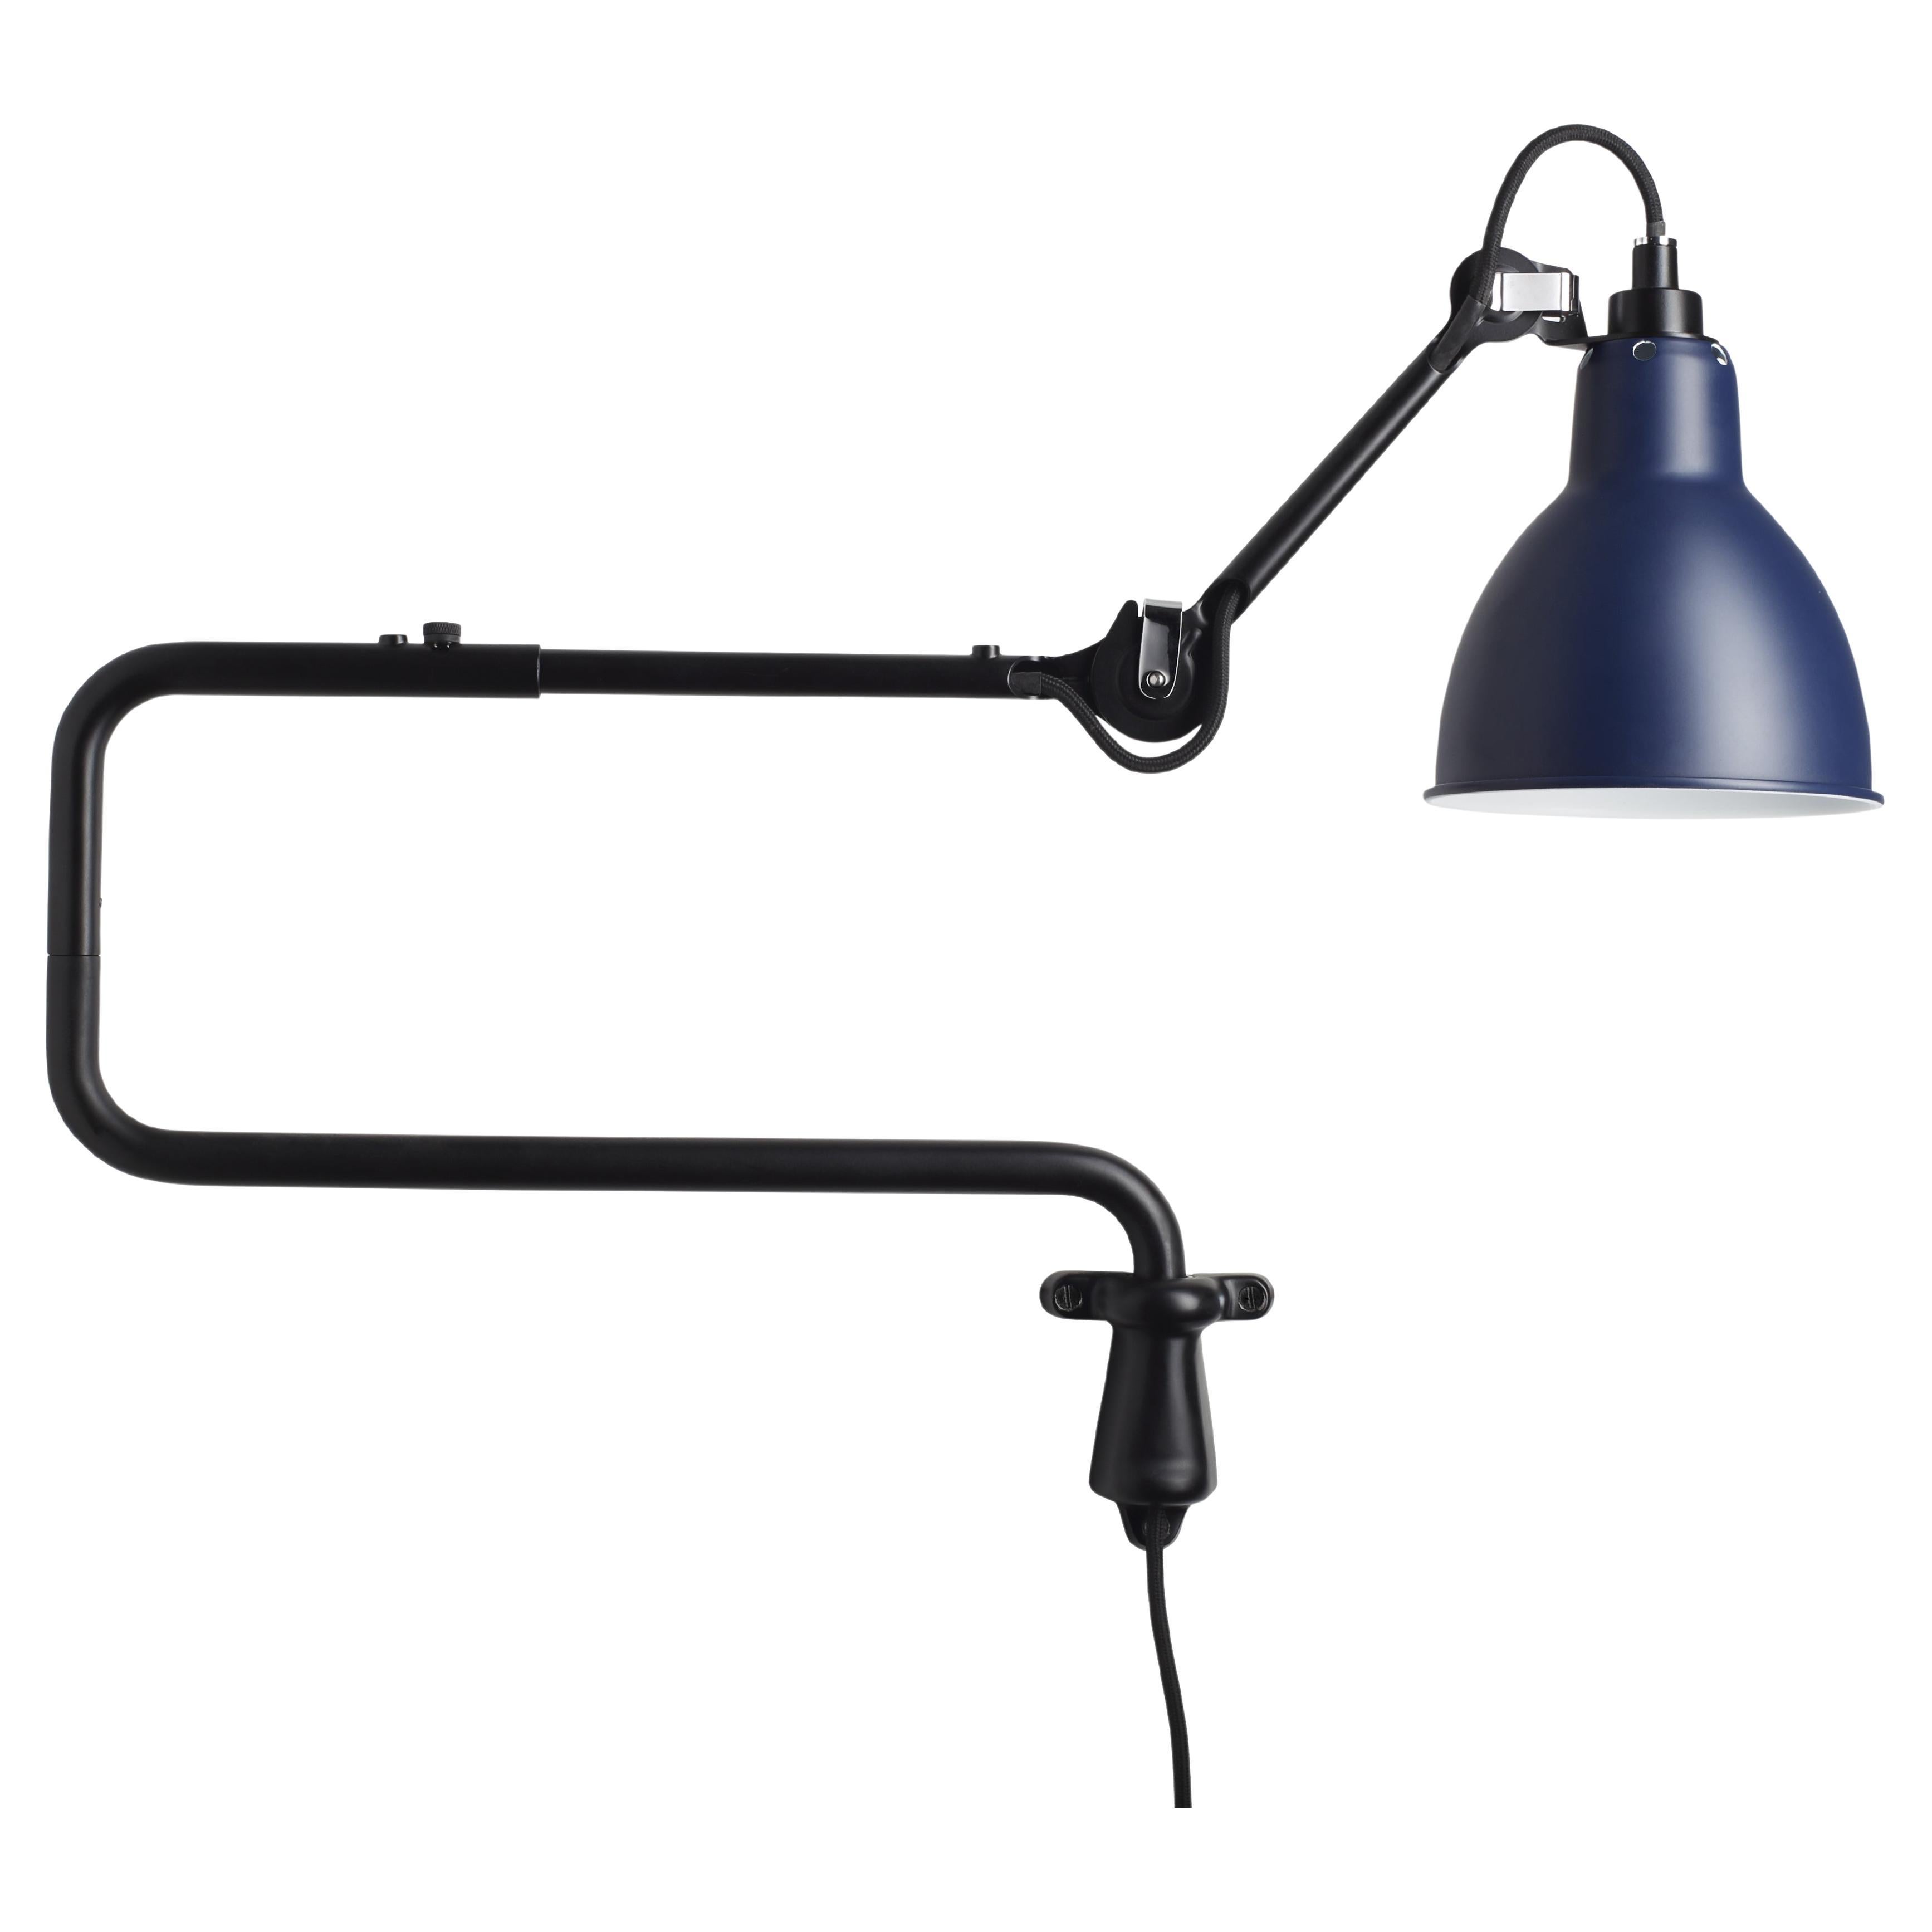 DCW Editions La Lampe Gras N°303 Wall Lamp in Black Arm and Blue Shade For Sale